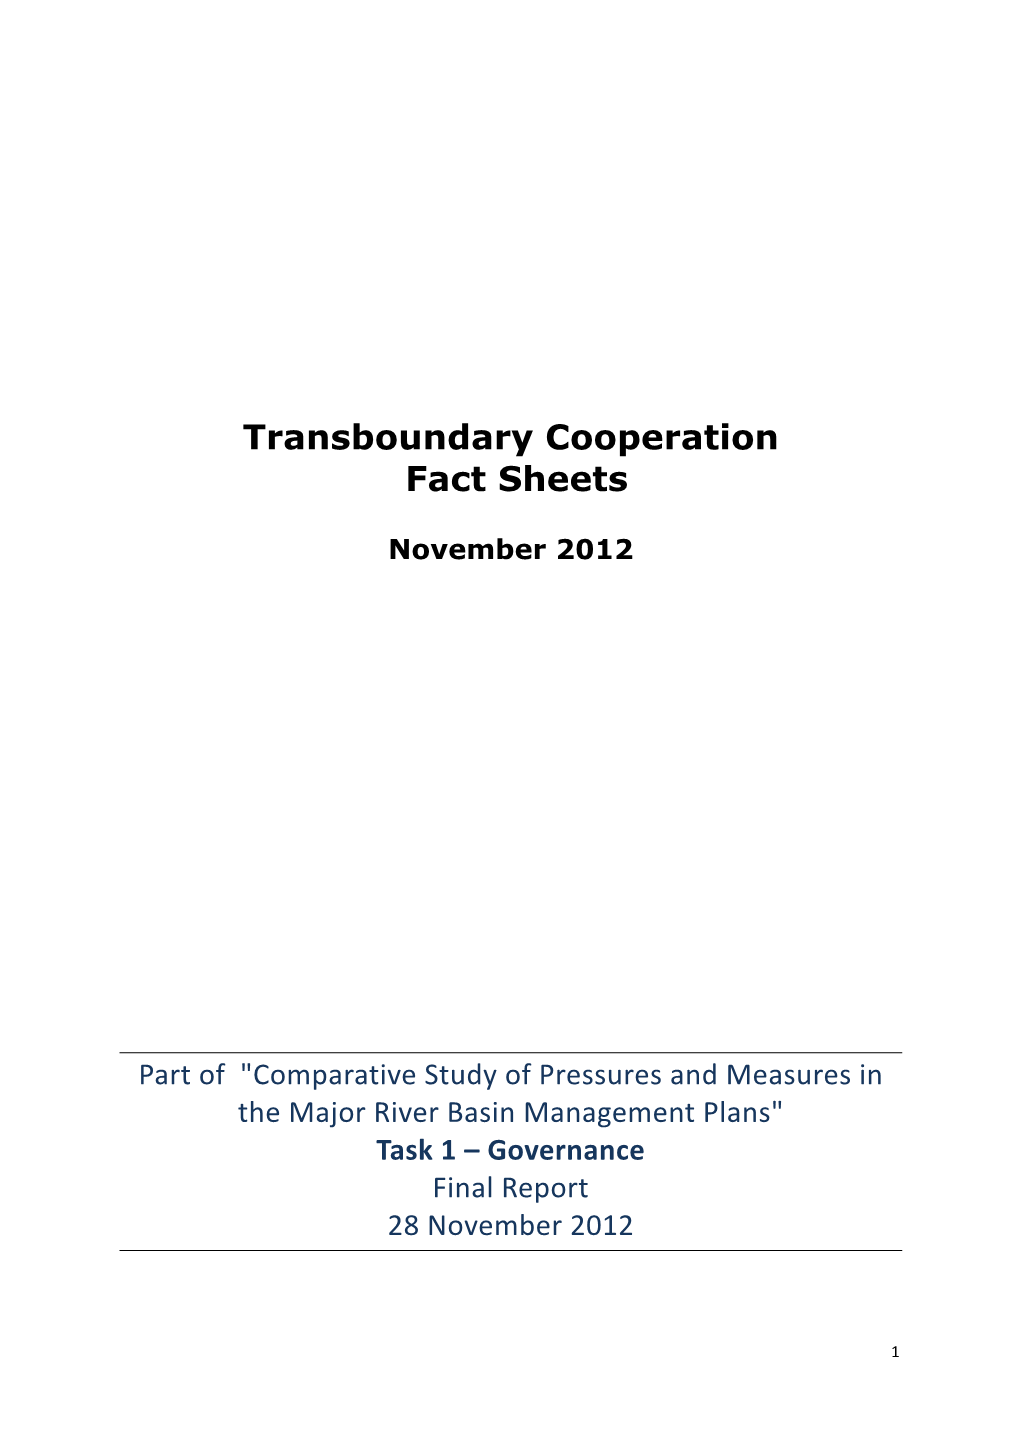 Transboundary Cooperation Fact Sheets